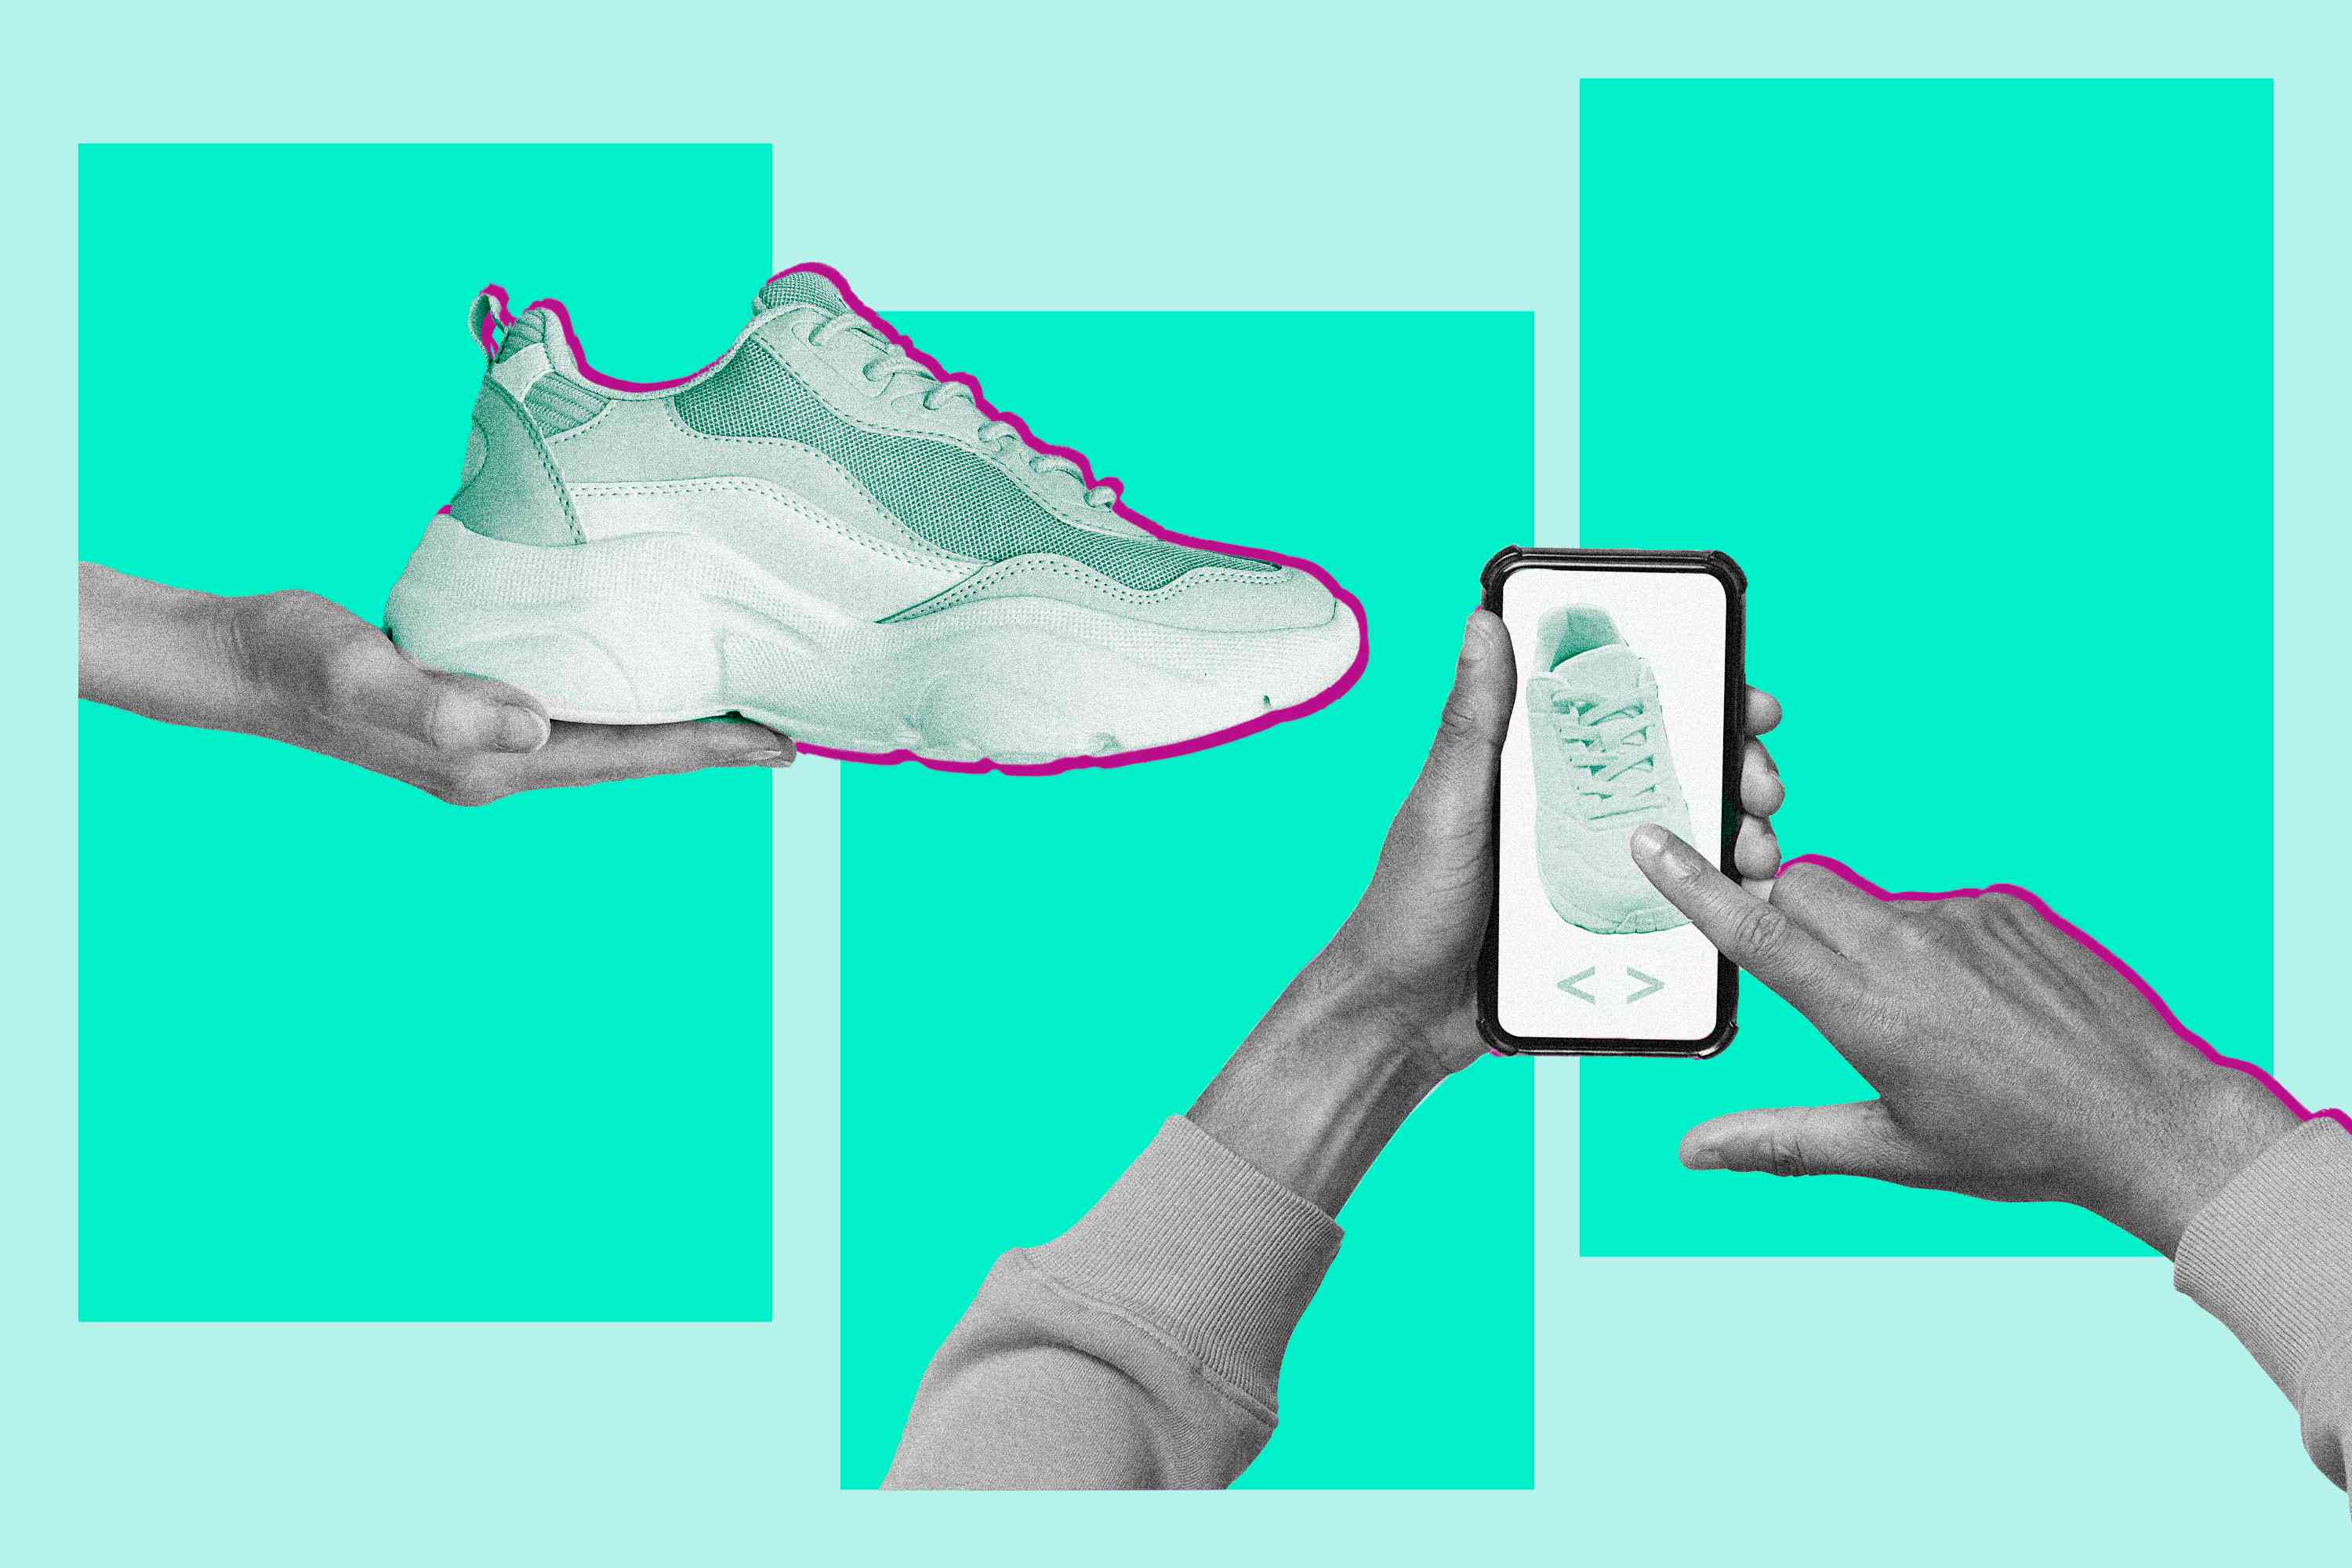 here’s what it’s like to get fitted for custom running shoes